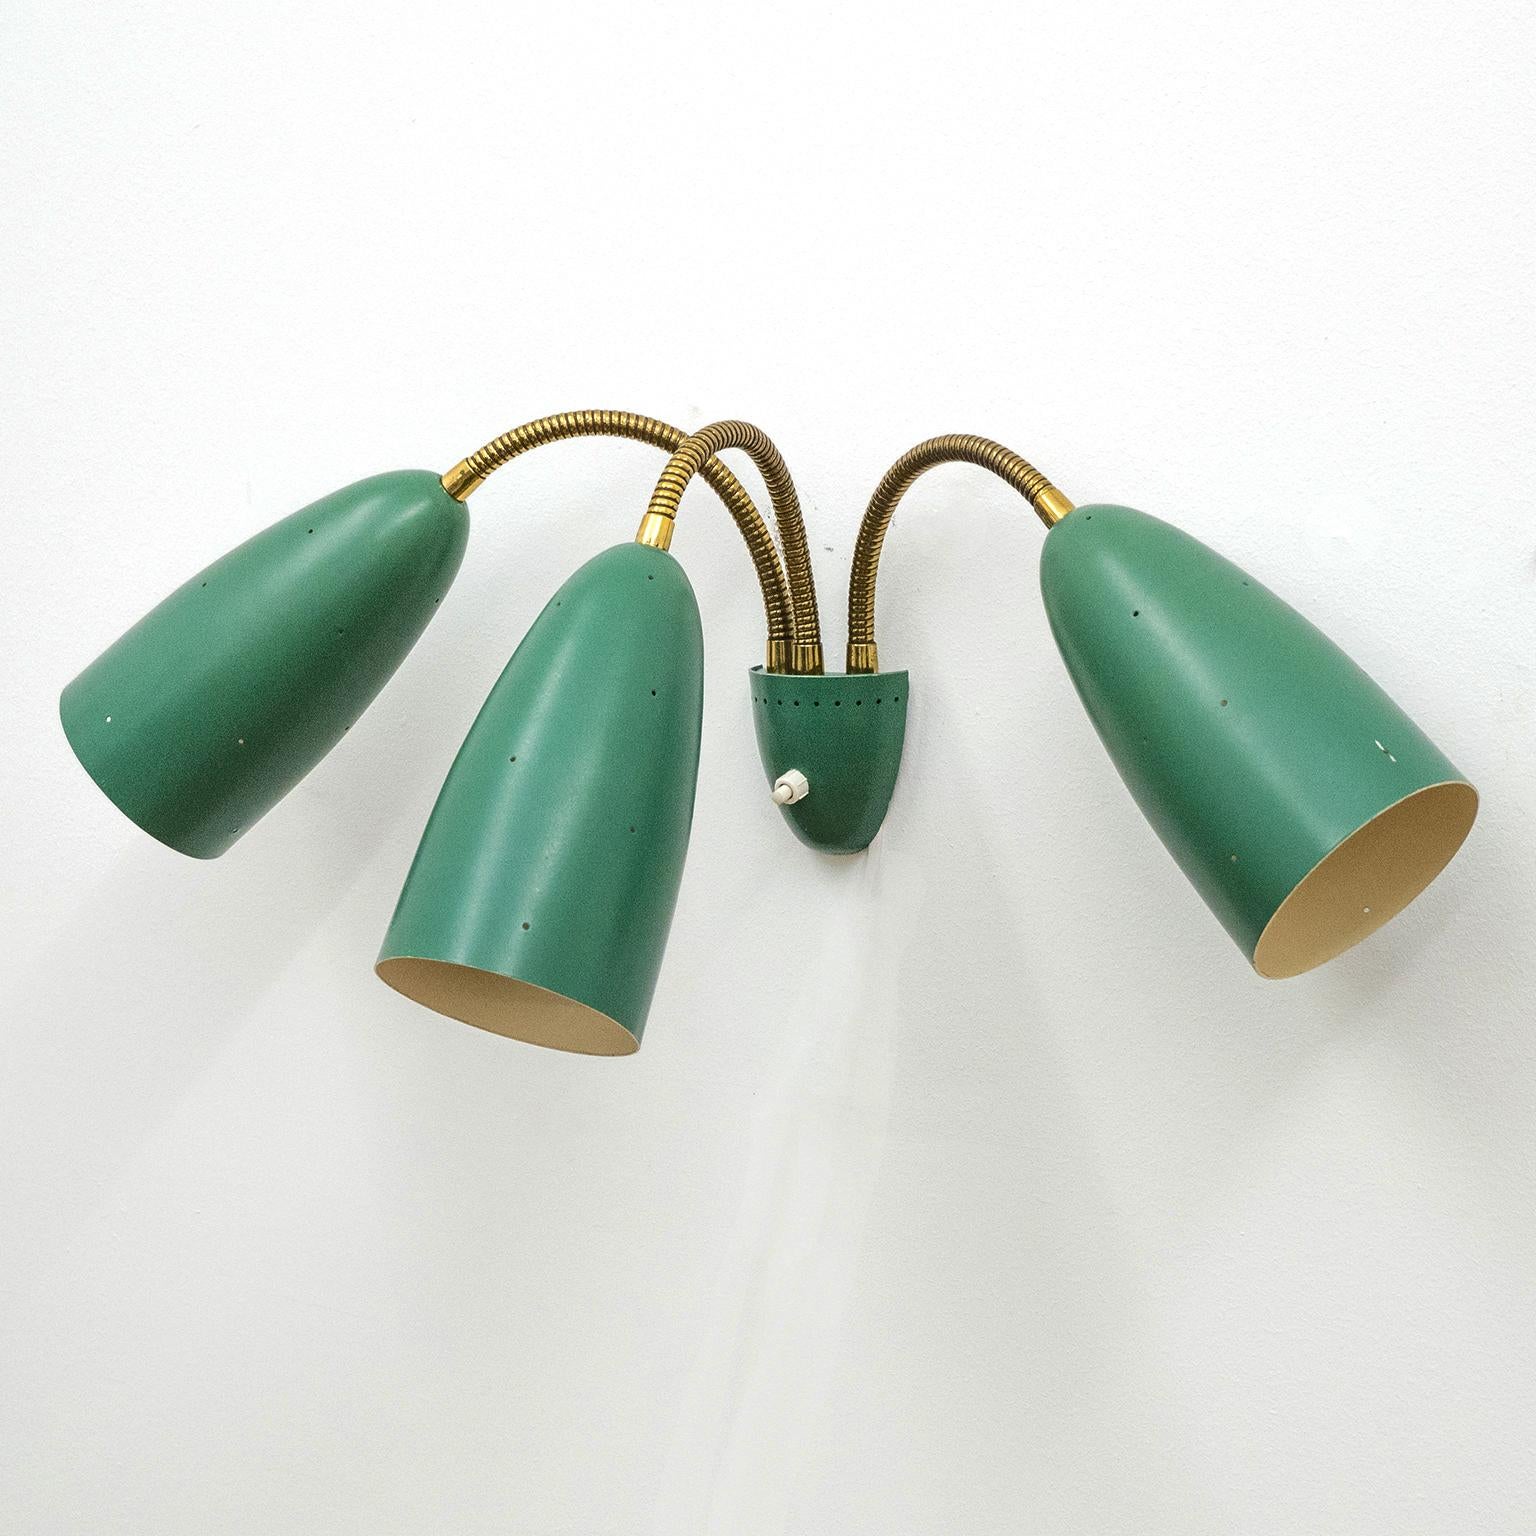 Mid-20th Century Large Three-Arm Wall Light with Pierced Green Cones, 1950s